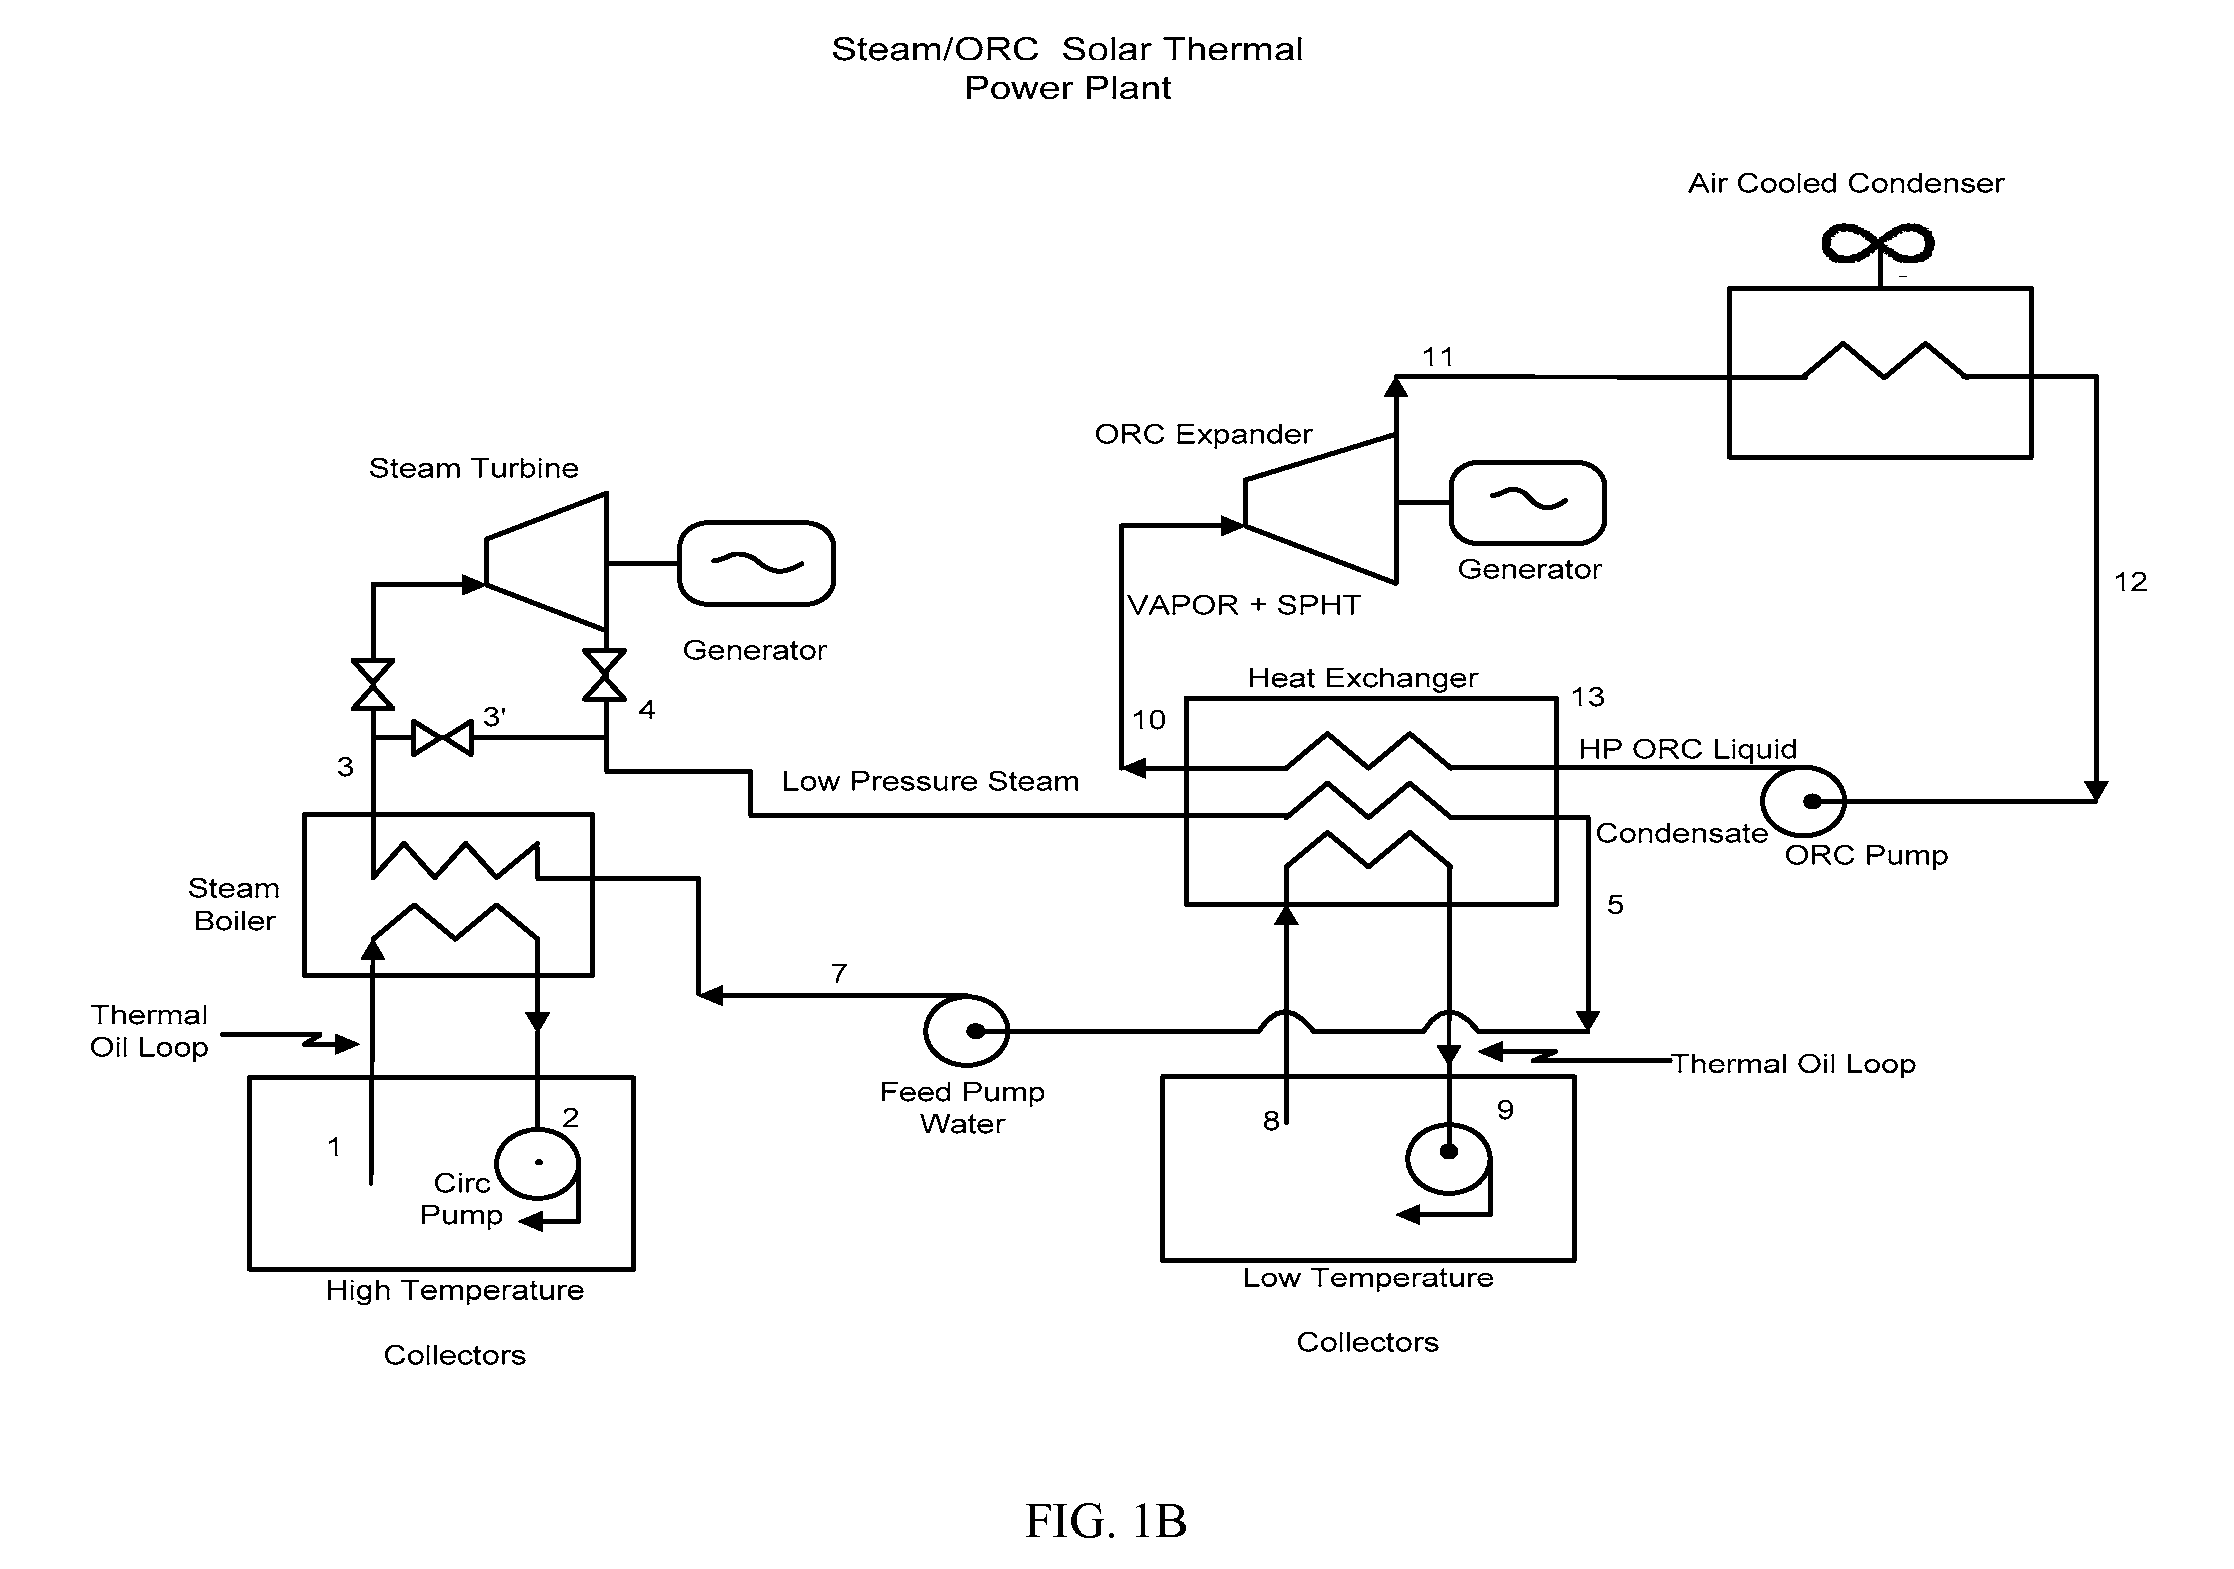 Solar thermal power generation using multiple working fluids in a rankine cycle